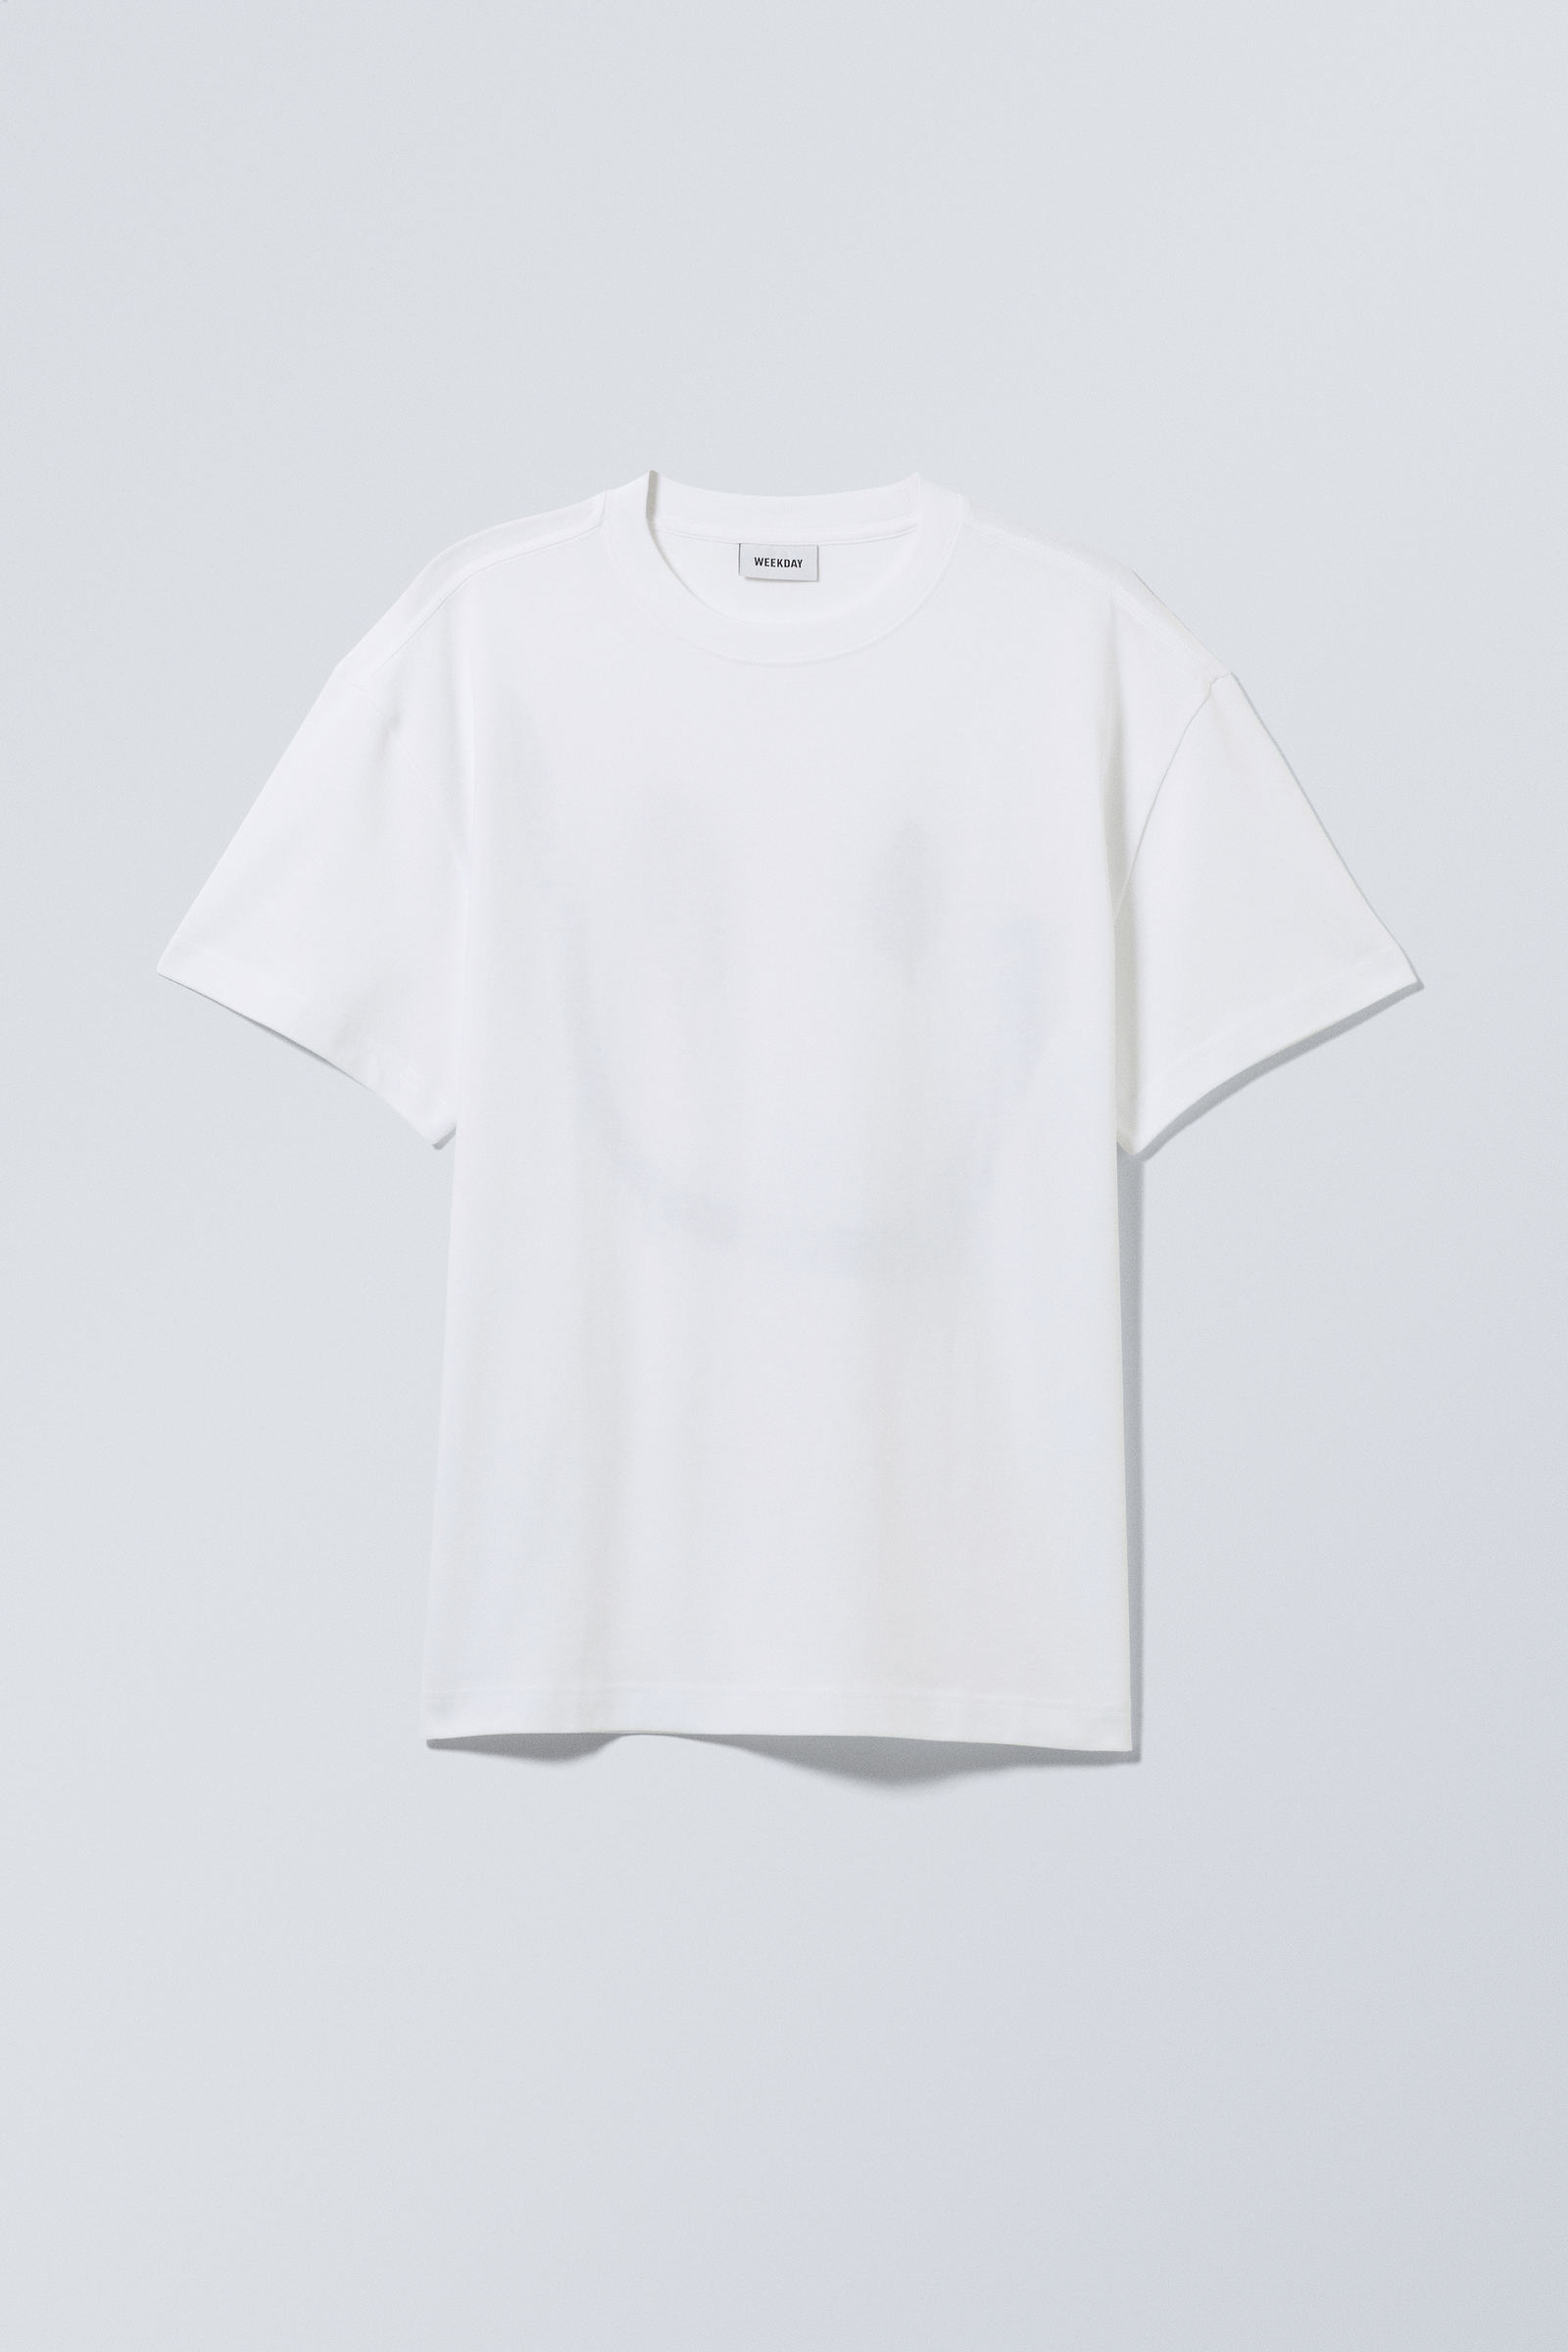 oversized graphic printed t-shirt - Drippy smiling face | Weekday EU